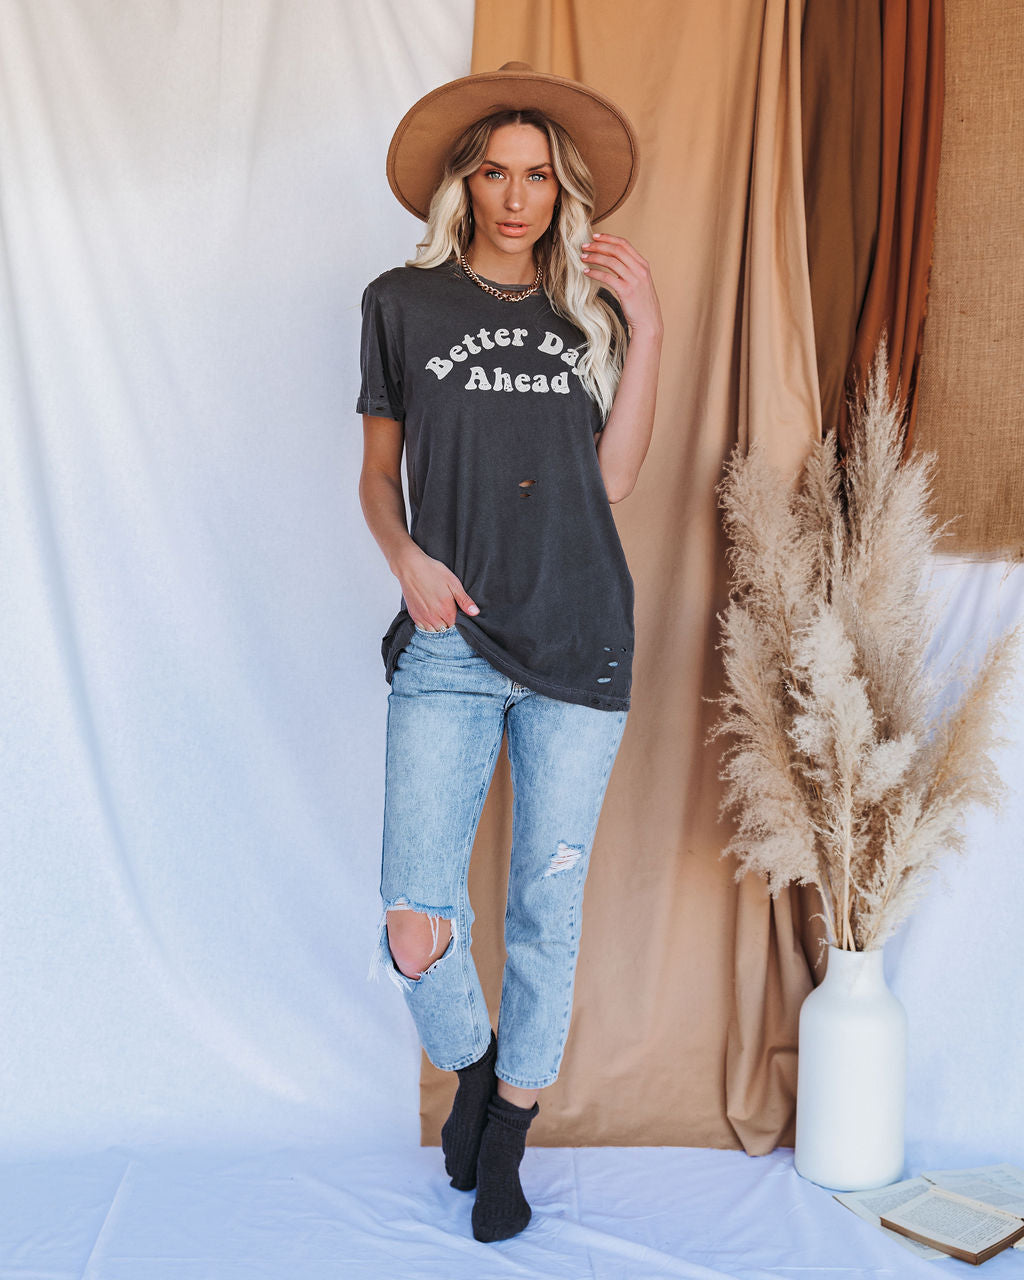 Better Days Ahead Distressed Cotton Tee